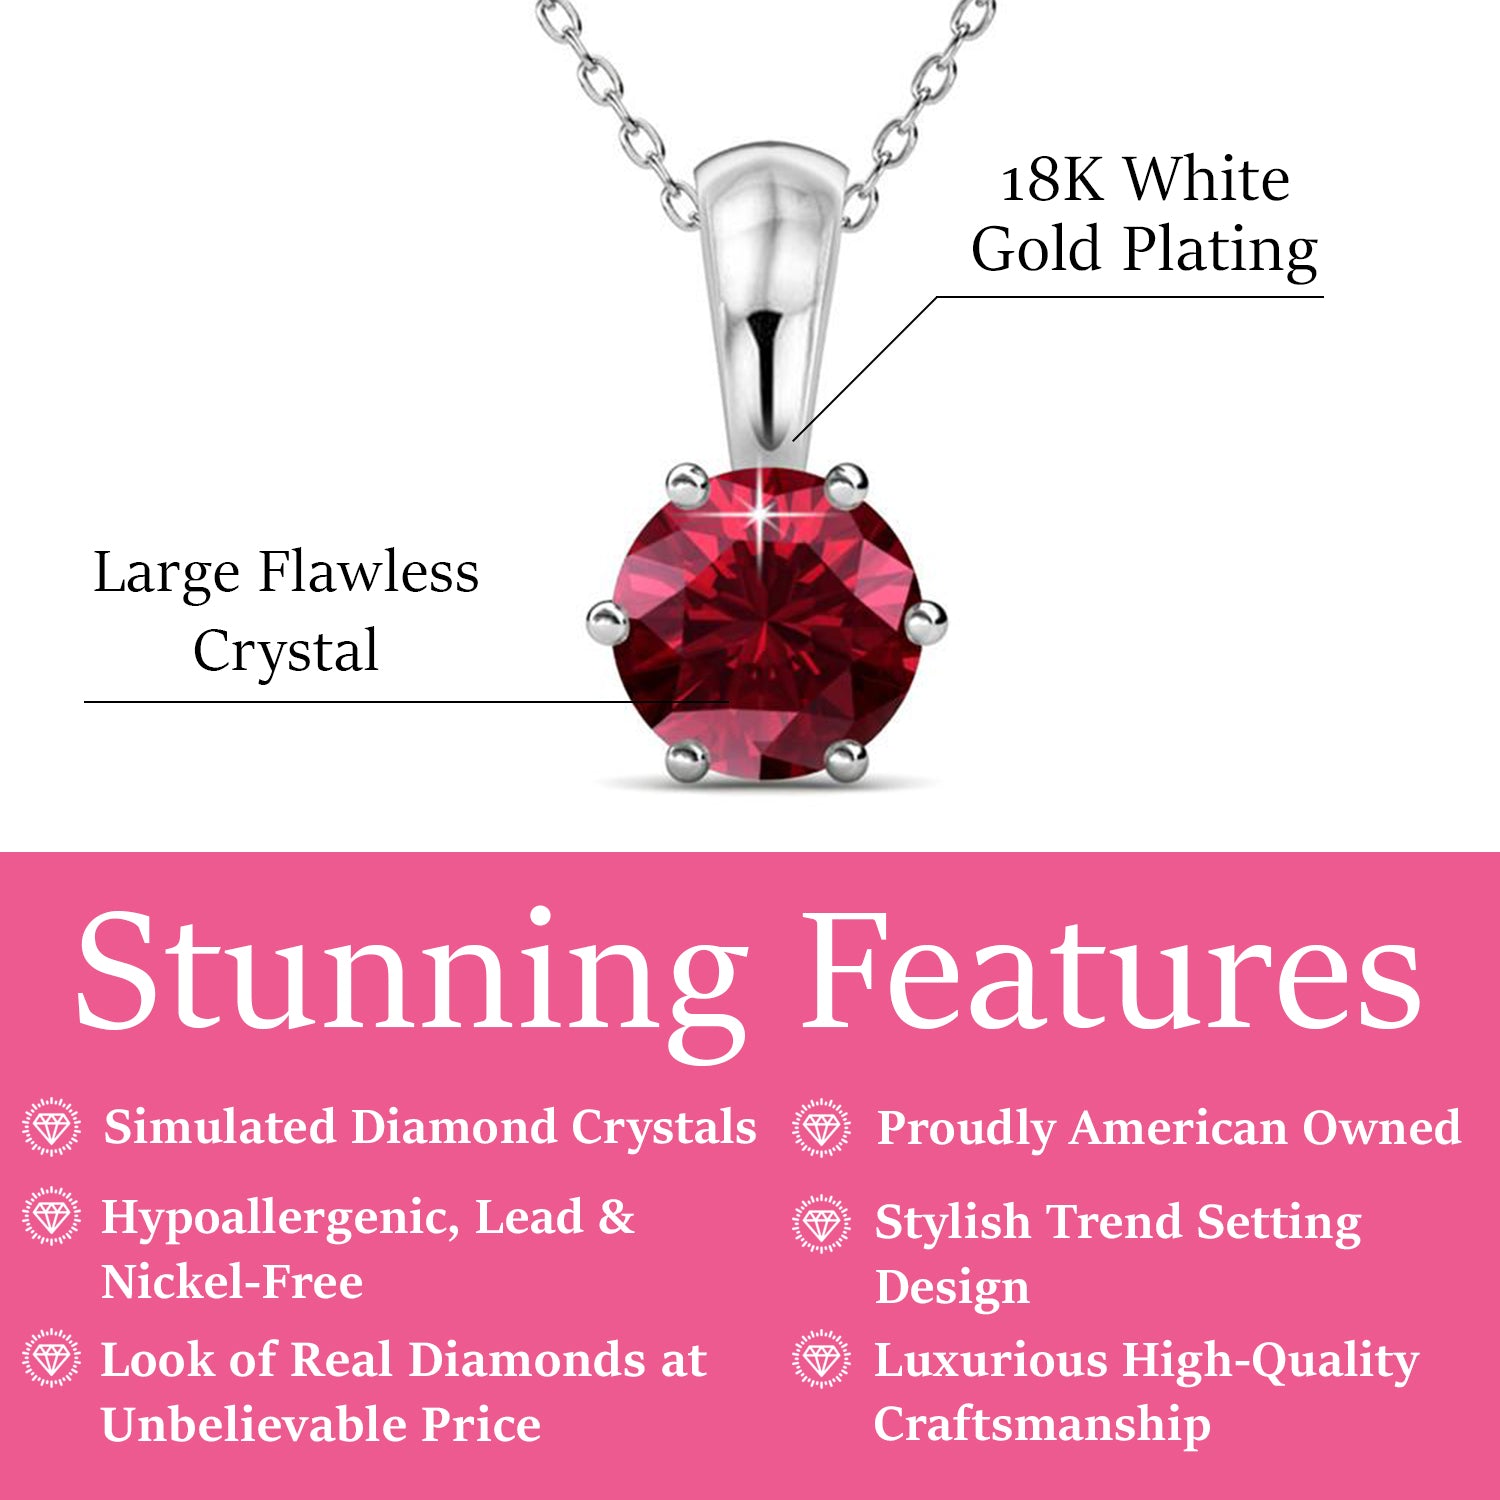 January Birthstone Garnet Necklace, 18k White Gold Plated Solitaire Necklace with 1CT Crystal